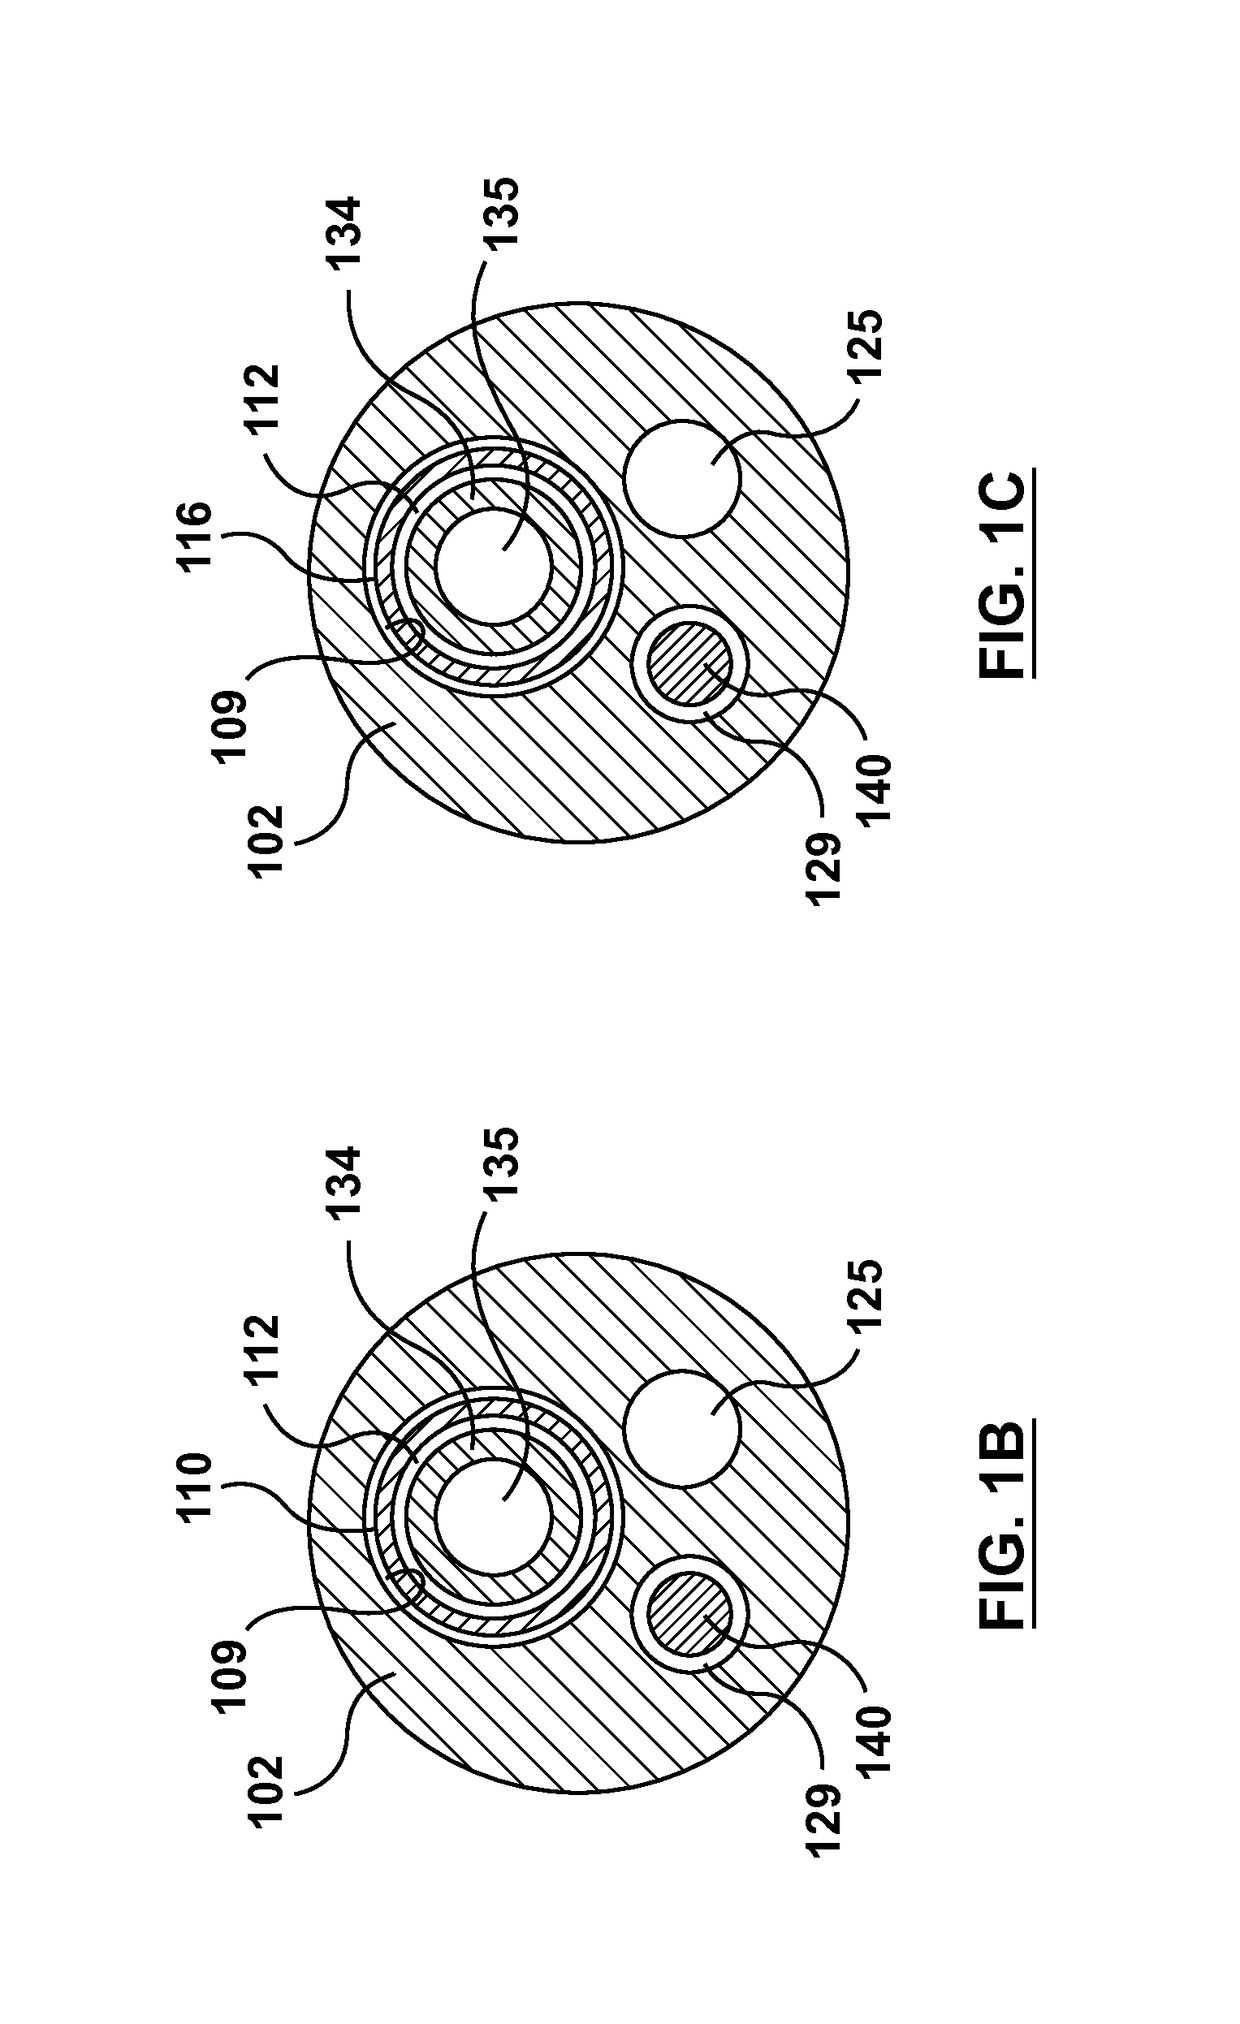 Occlusion bypassing apparatus with a re-entry needle and a stabilization tube